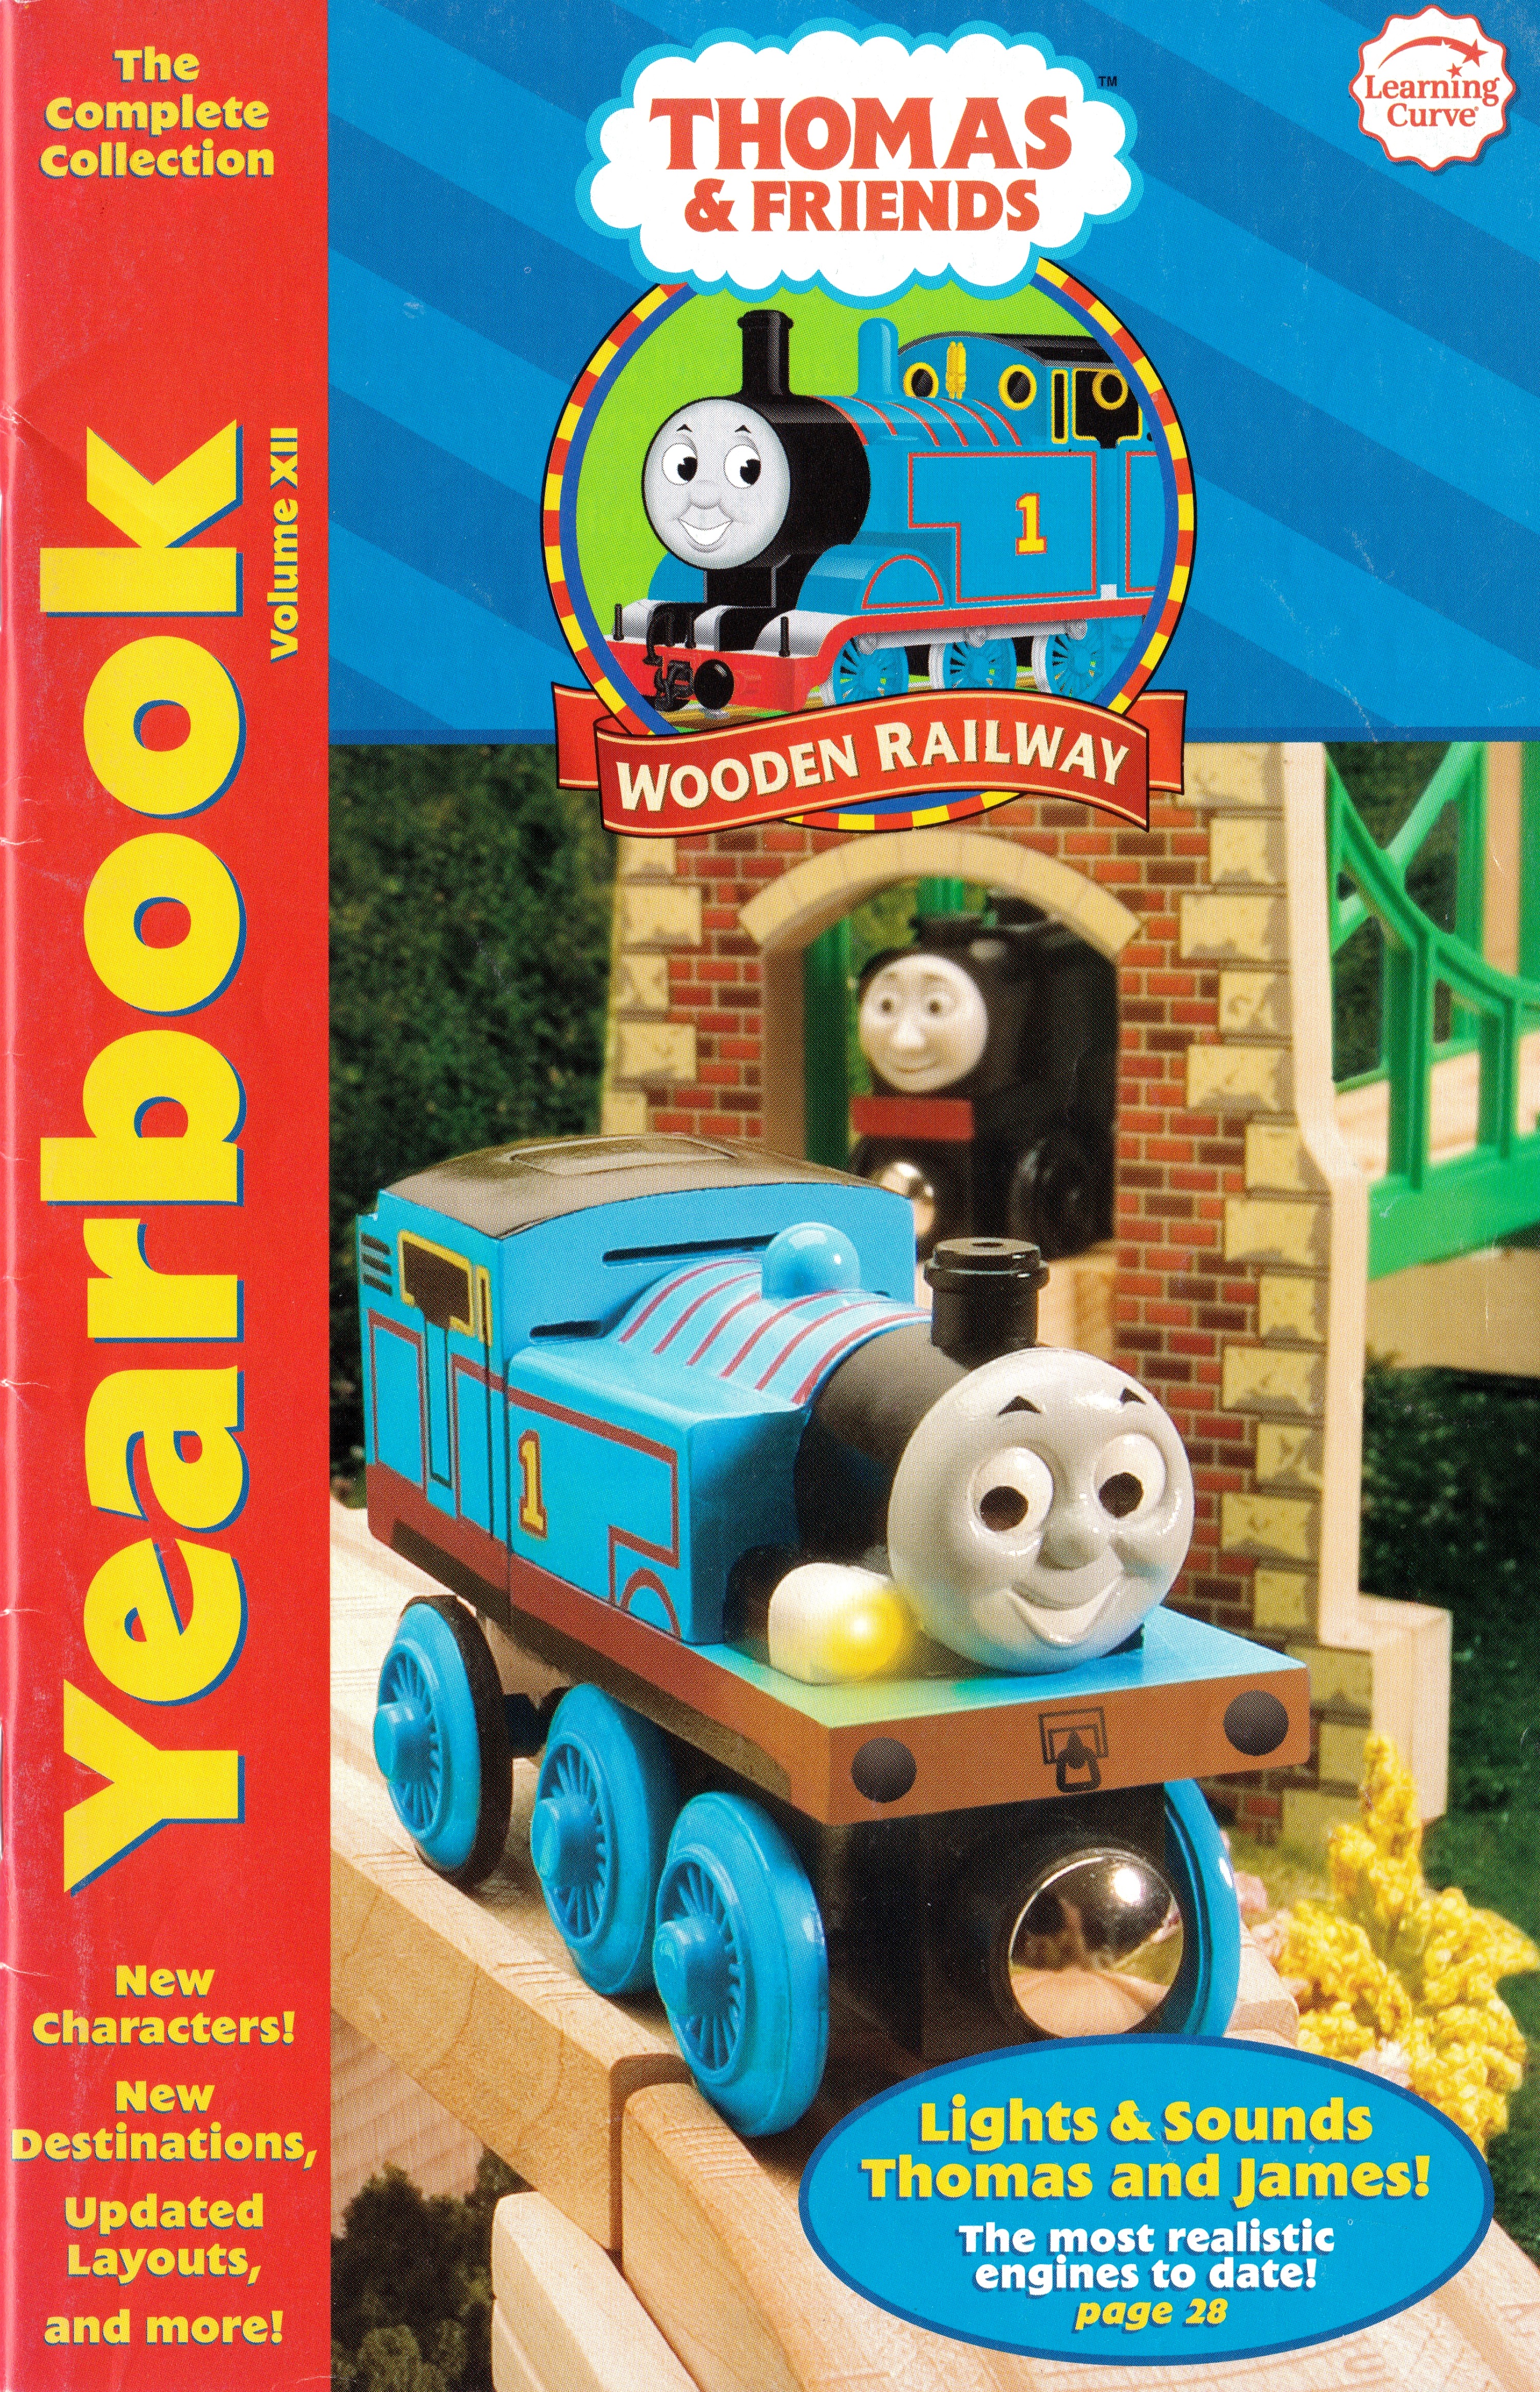 Details about   THOMAS & FRIENDS WOODEN RAILWAY  ~ 2007 YEARBOOK XIII ~ ABSOLUTELY MINT ~ JEREMY 